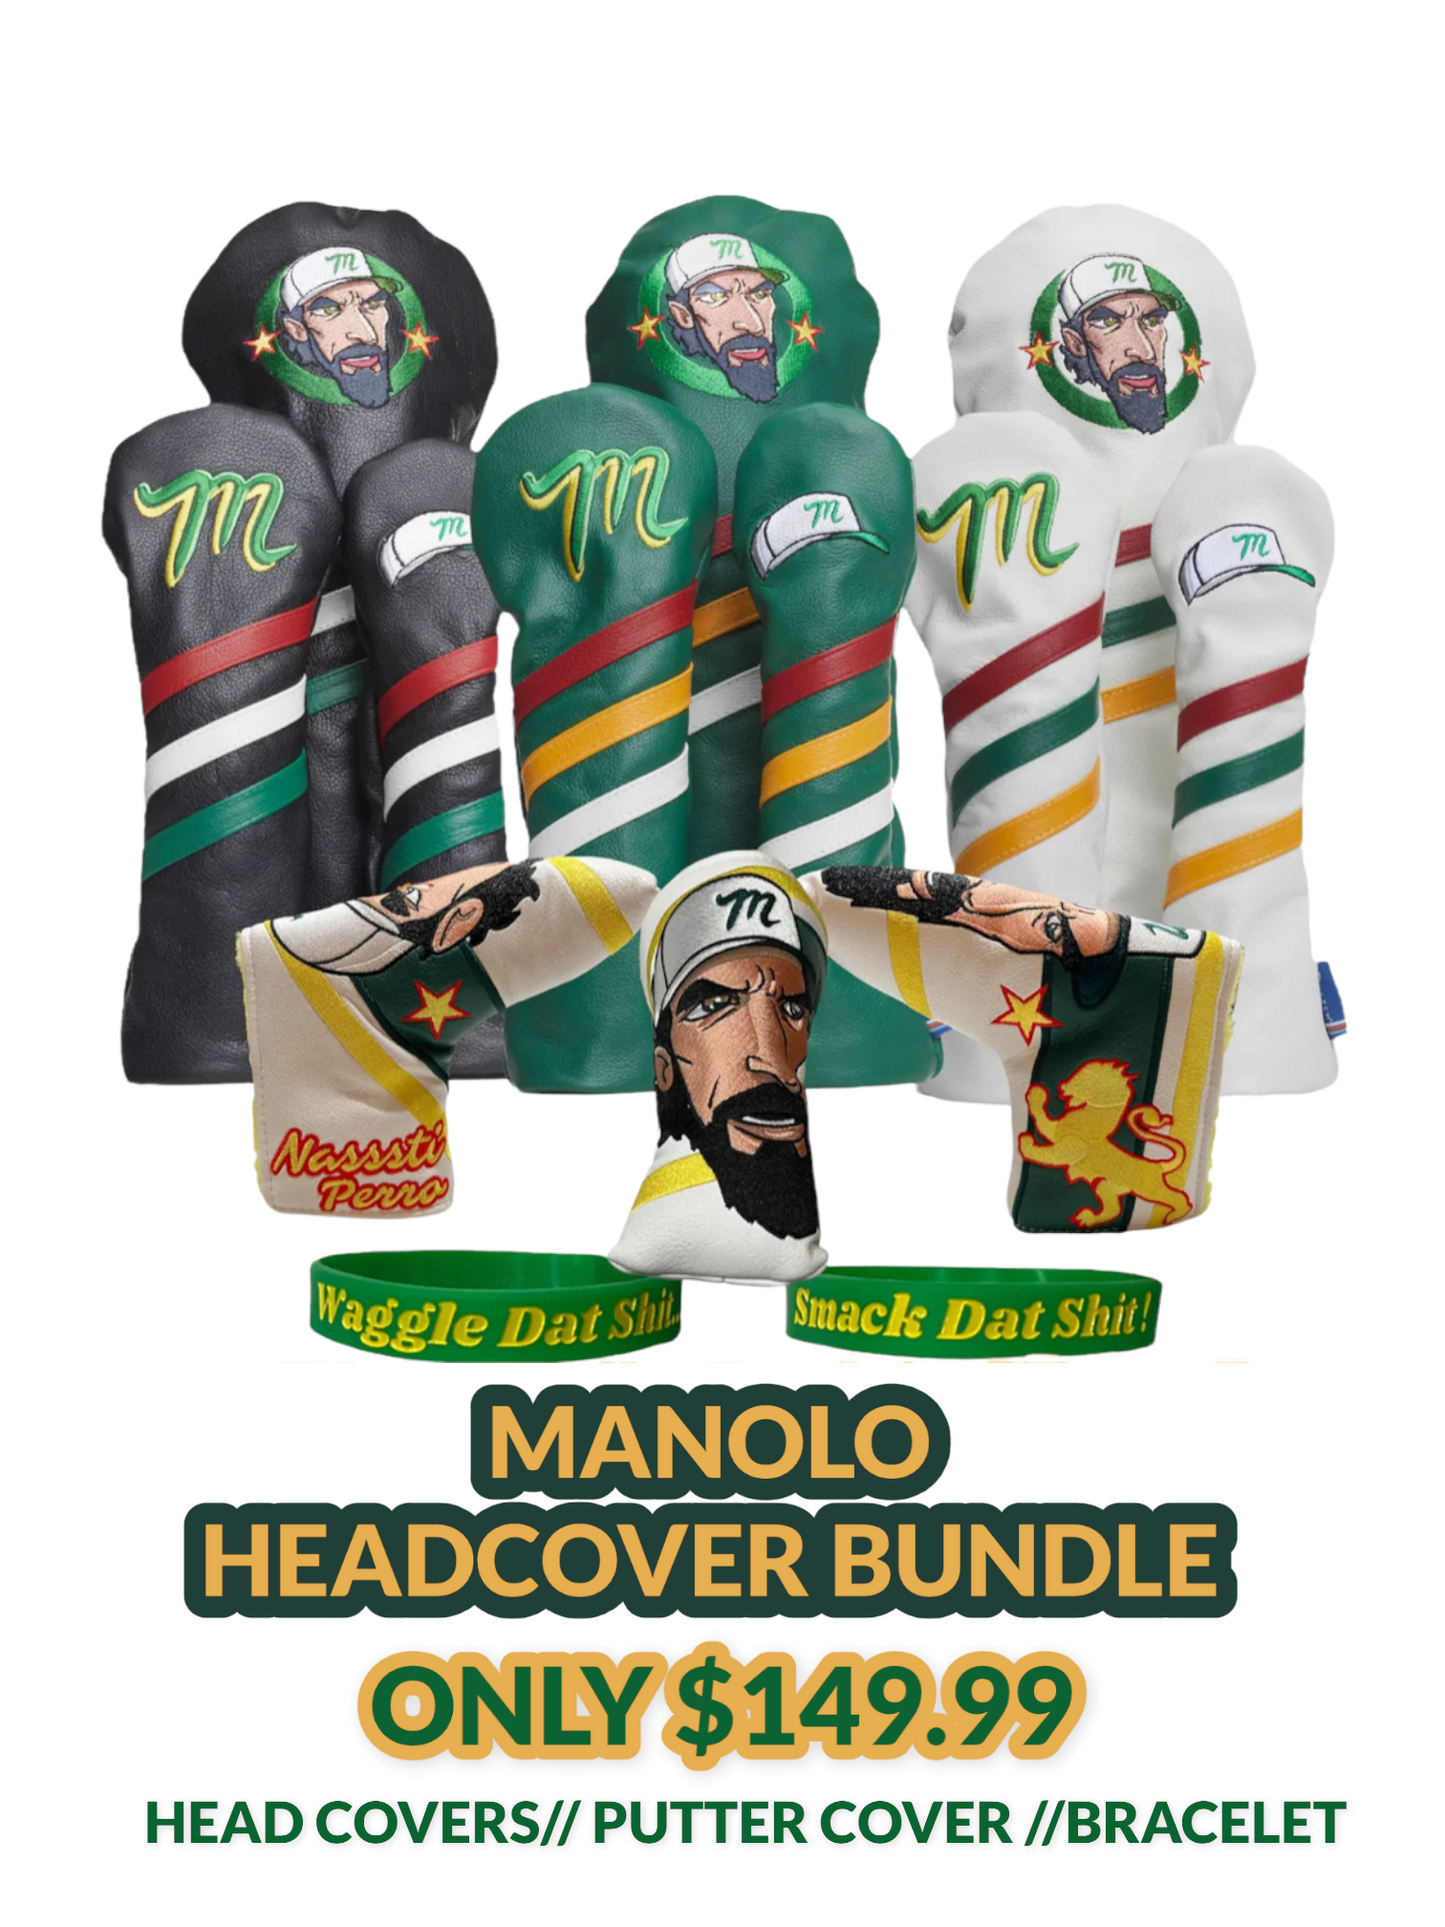 Manolo Head covers and Putter Cover Bundle with Bracelet